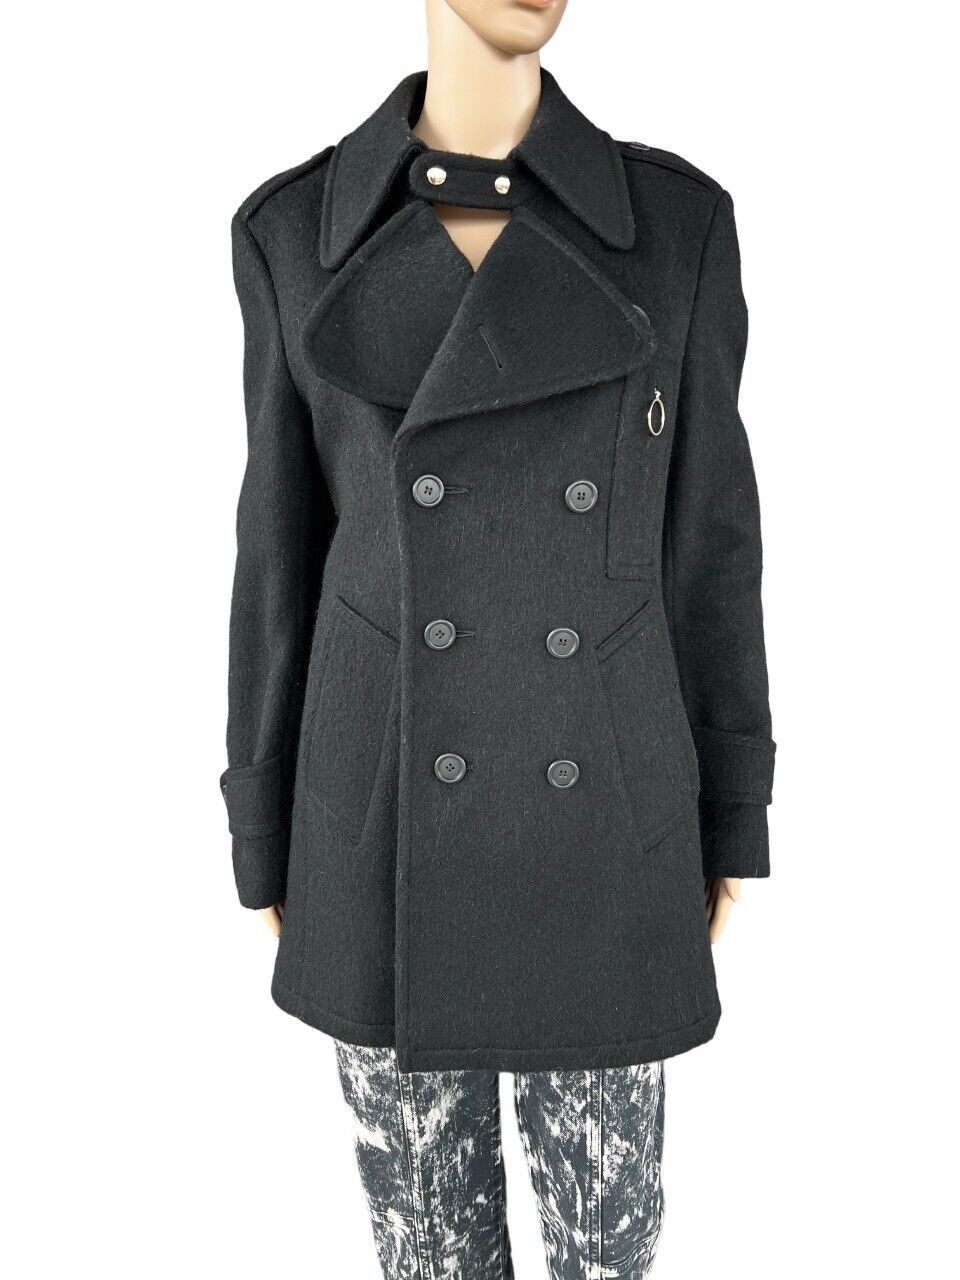 Primary image for Schneiders black wool women's coat. RRP $360, size XS/S